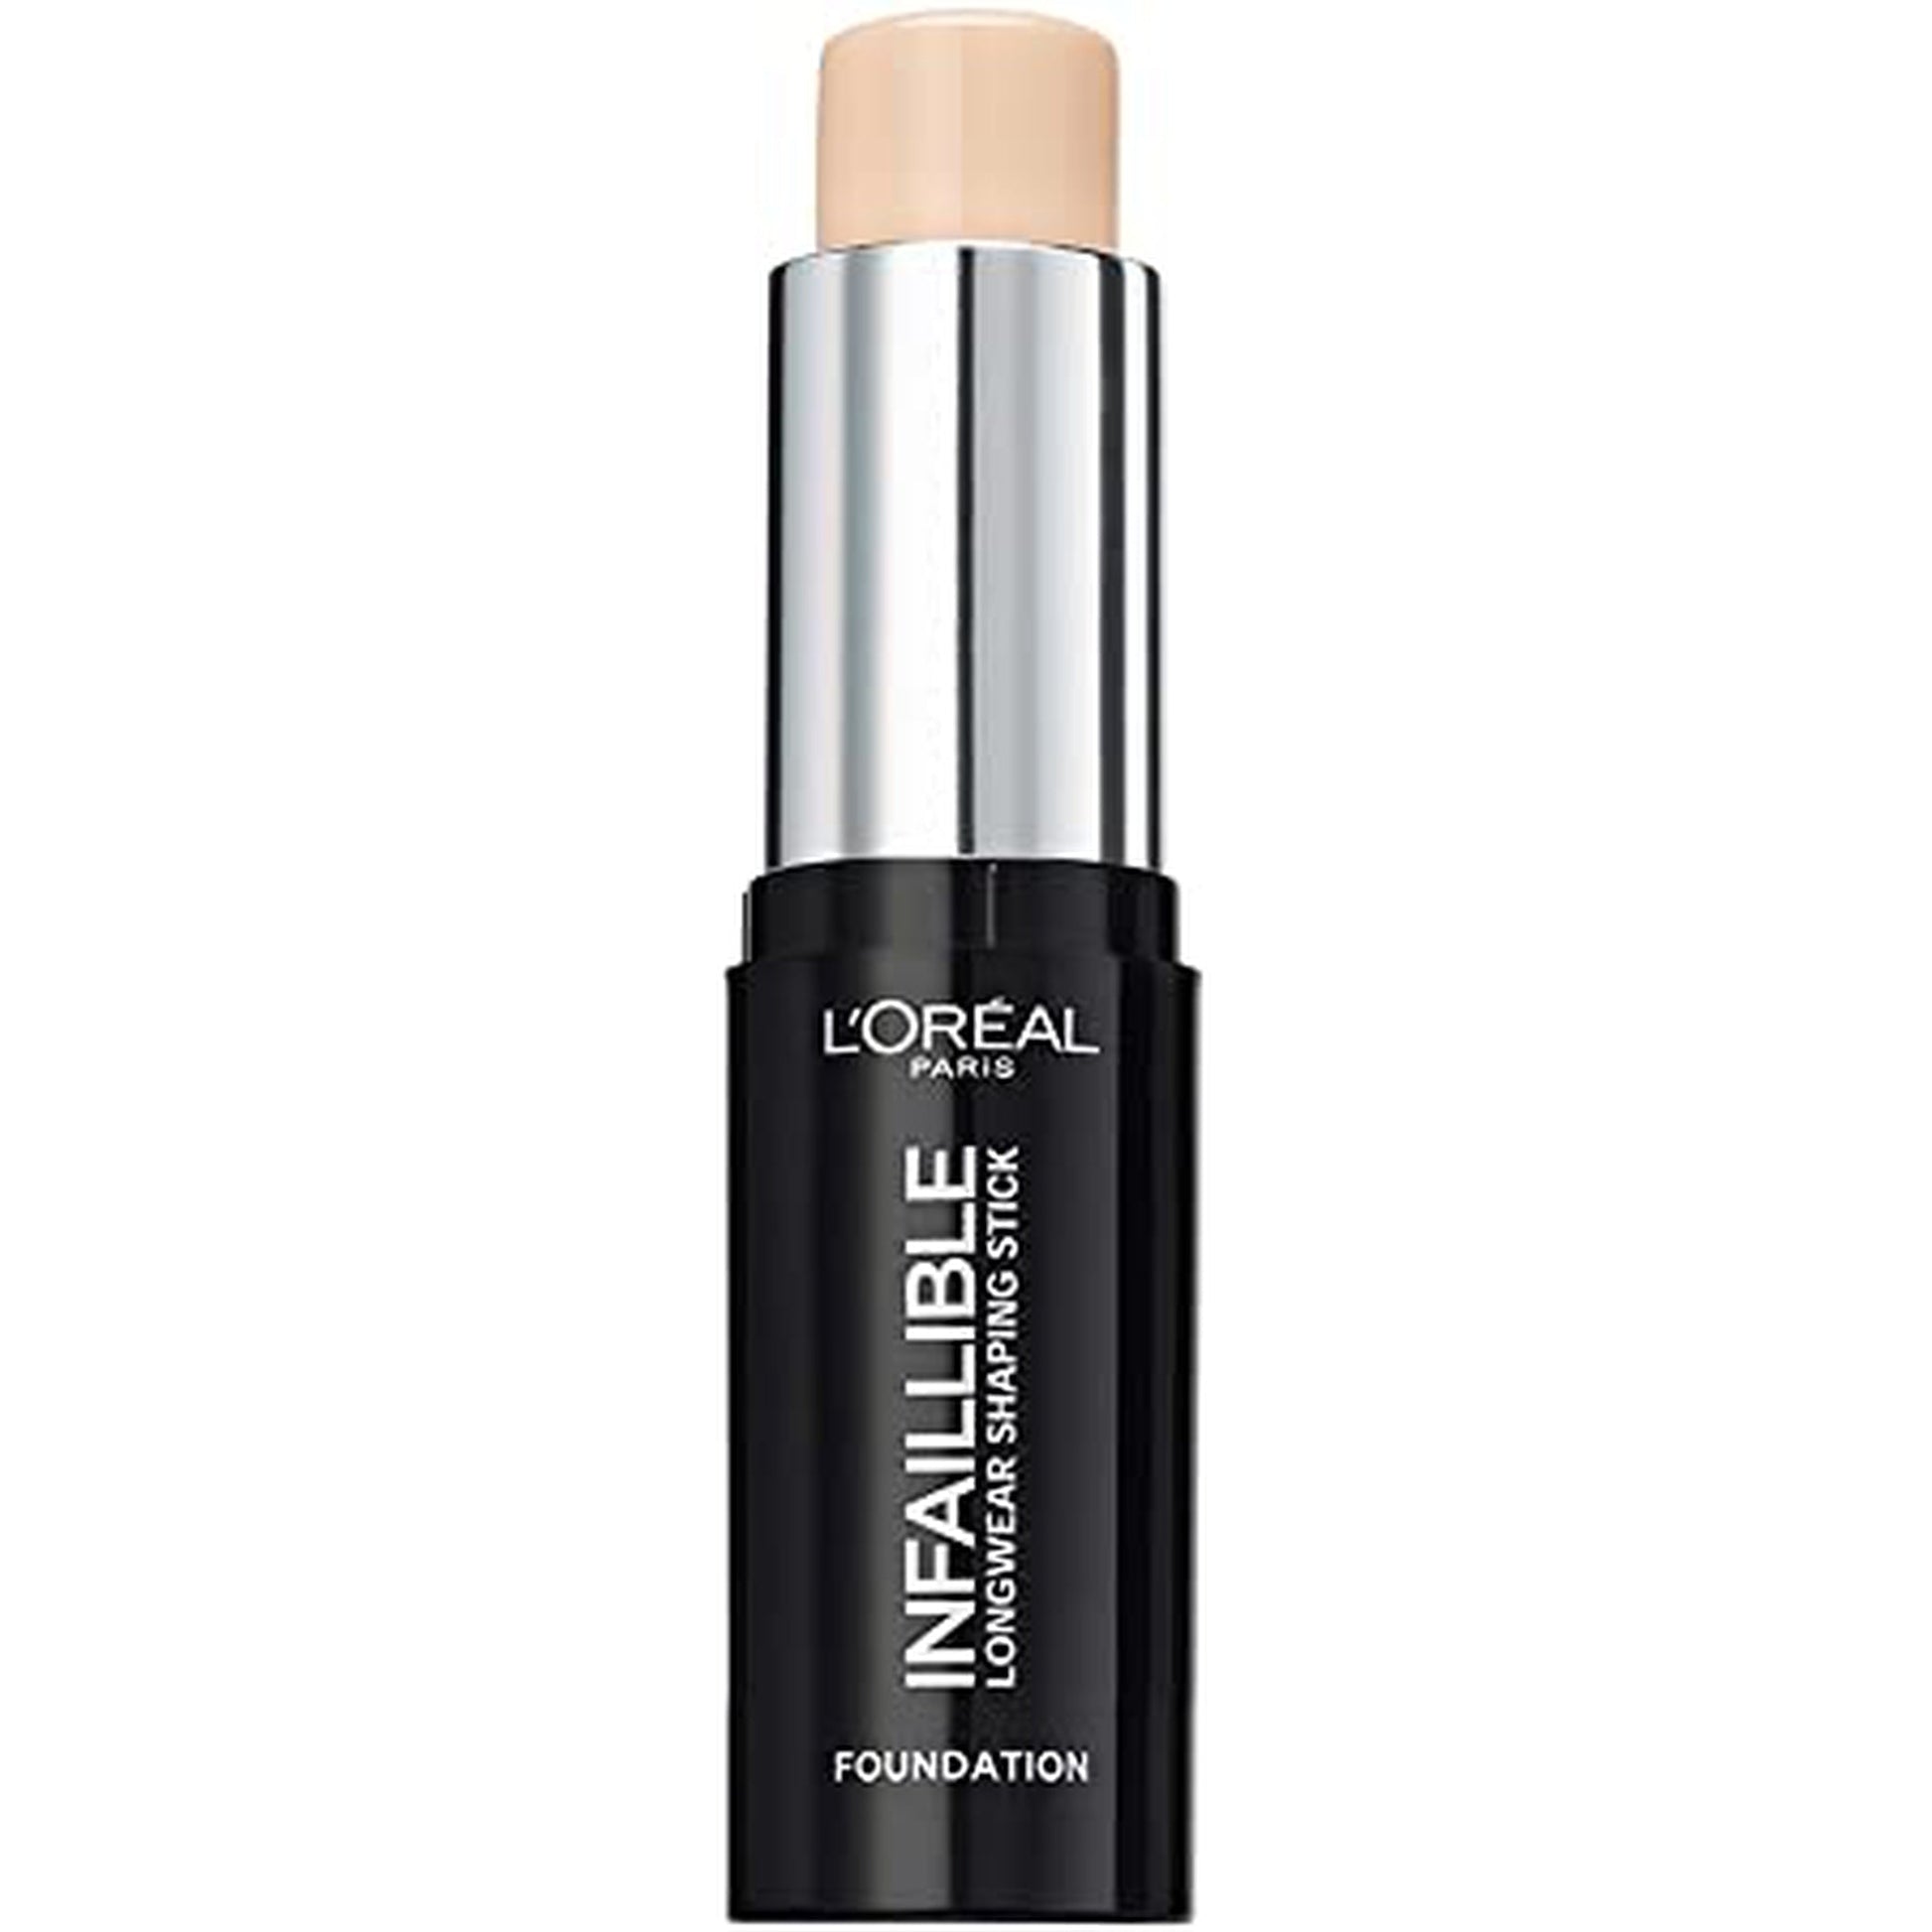 L'Oreal Infallible Foundation Stick - 100 Ivory-L'Oreal-BeautyNmakeup.co.uk